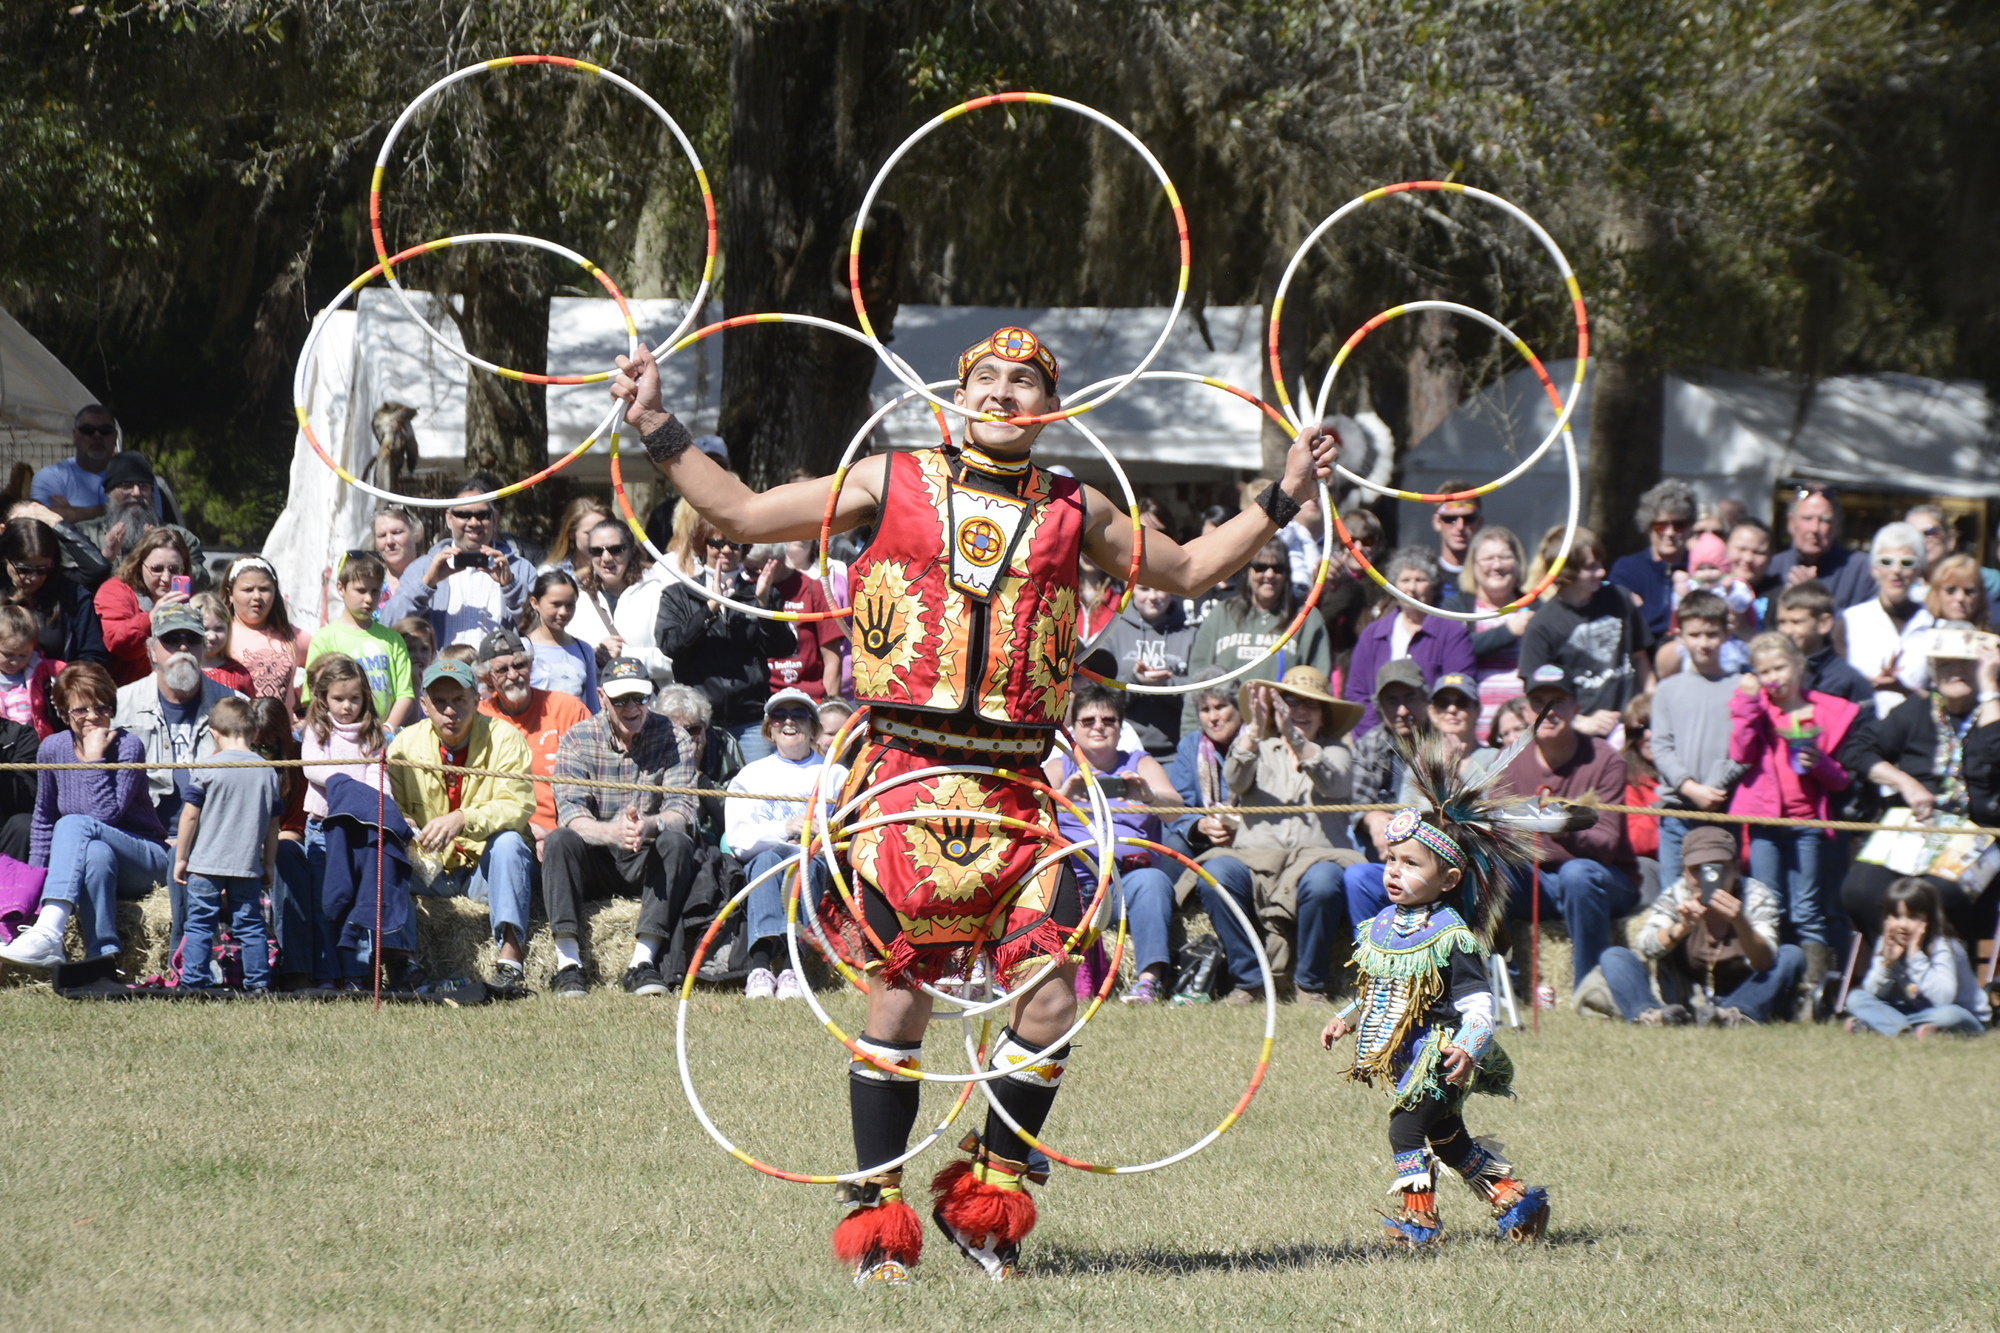 Cody Boettner is ranked within the top 10 in the nation for hoop dancing.